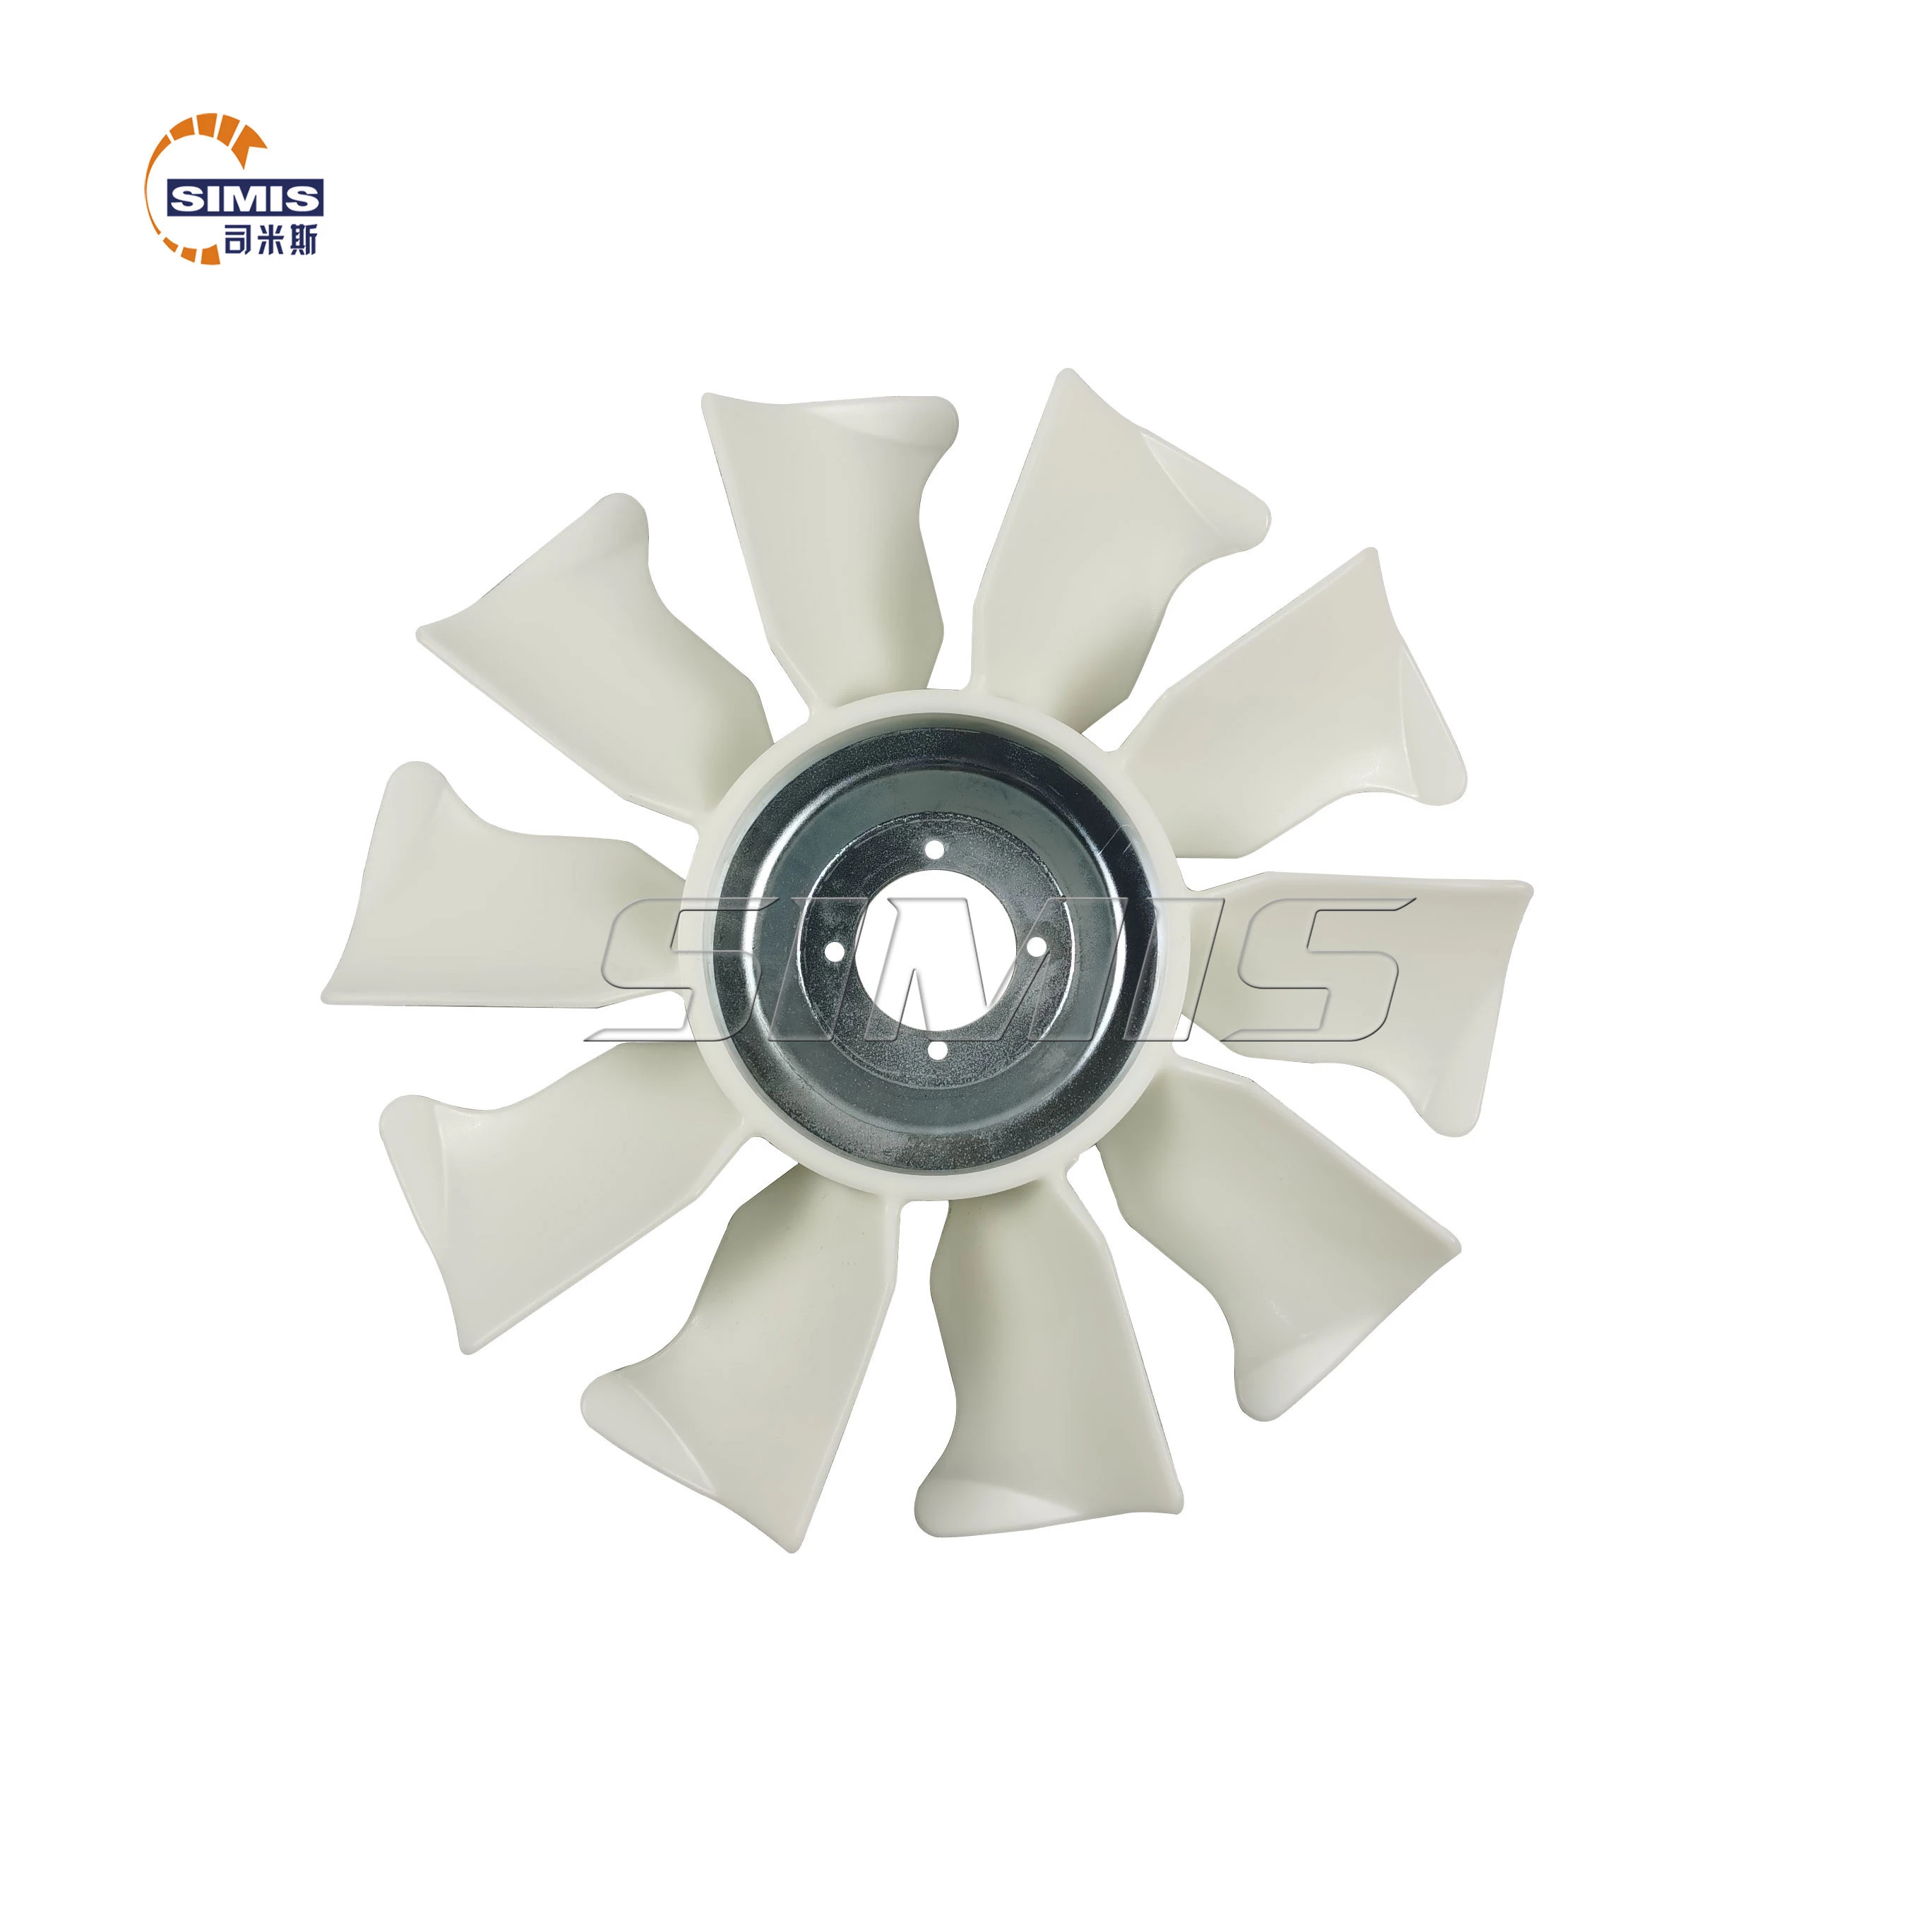 SIMIS Forklift Parts Fan Blade For S4S With OEM 32A48-00300